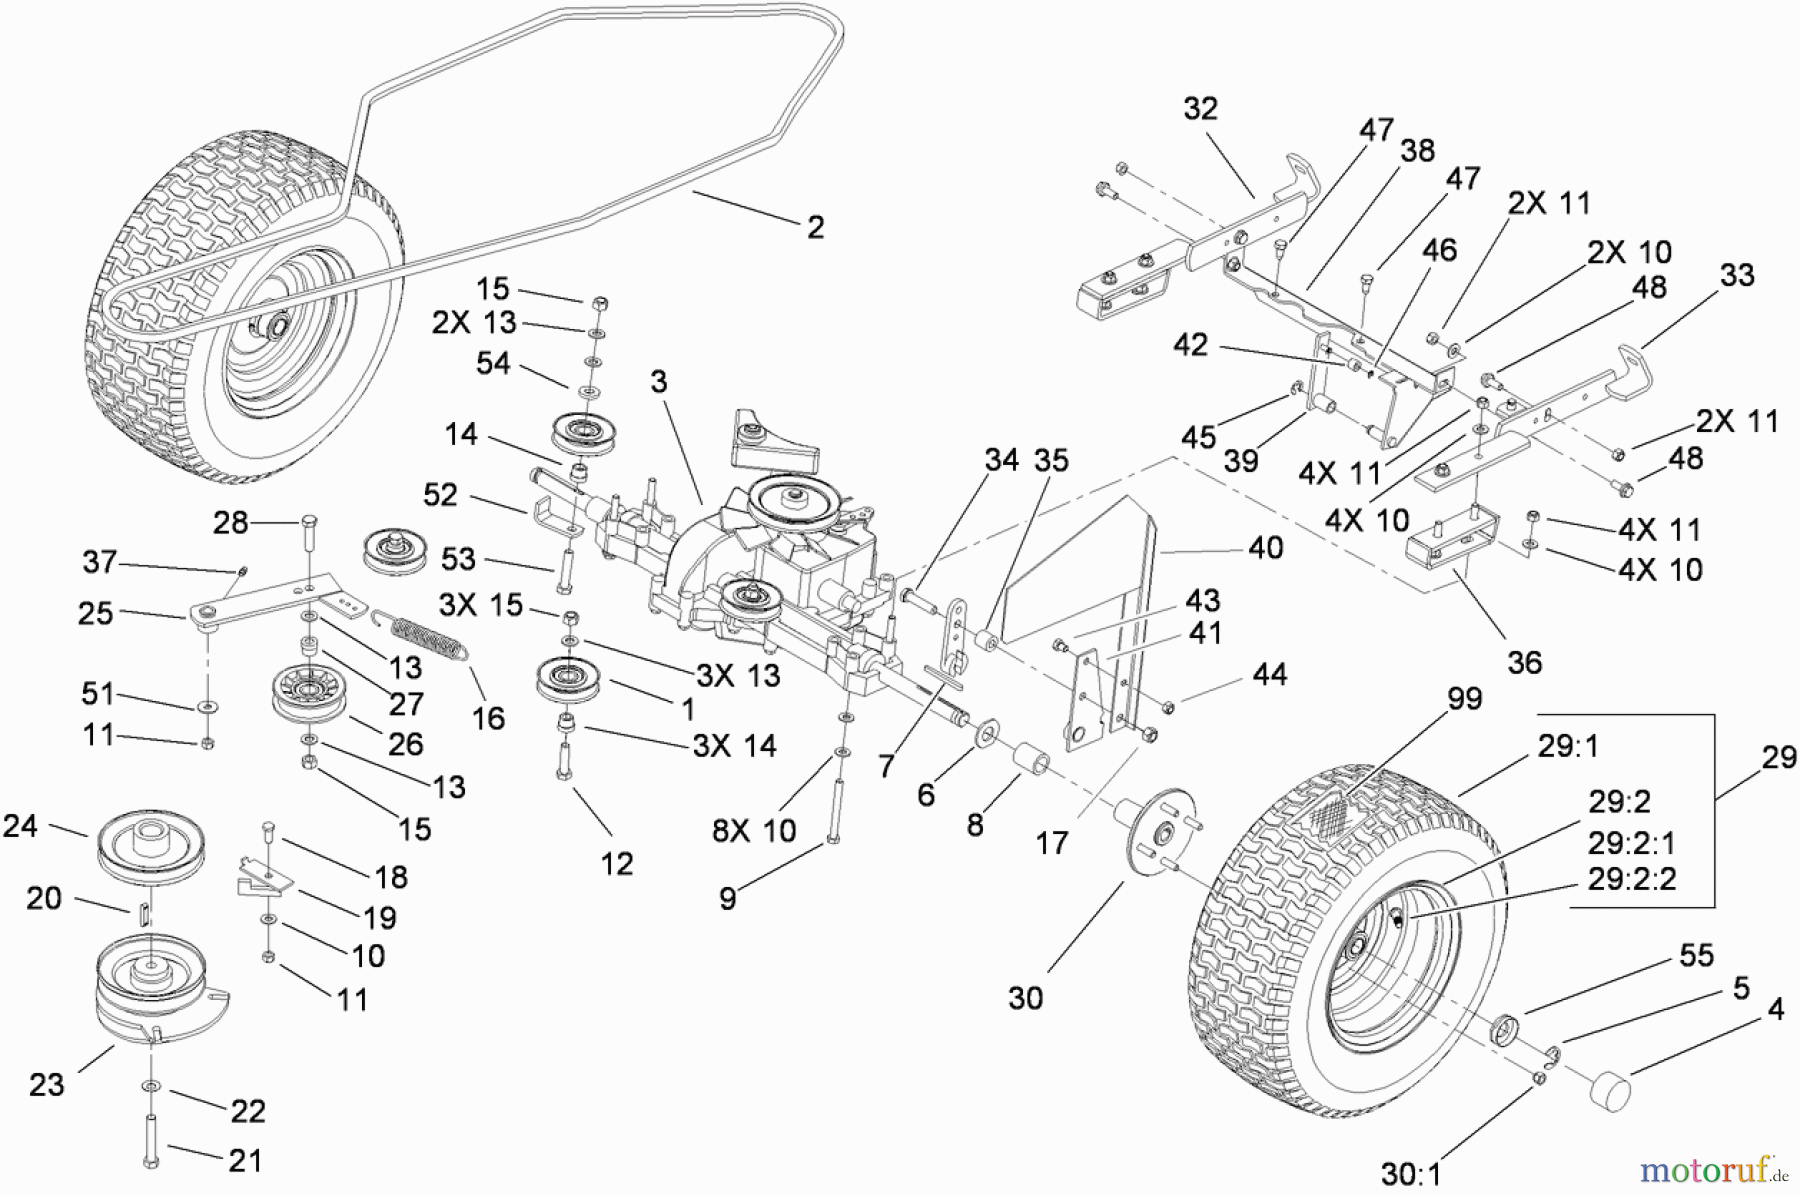  Toro Neu Mowers, Lawn & Garden Tractor Seite 1 74593 (DH 220) - Toro DH 220 Lawn Tractor, 2009 (290000001-290999999) TRANSMISSION ASSEMBLY